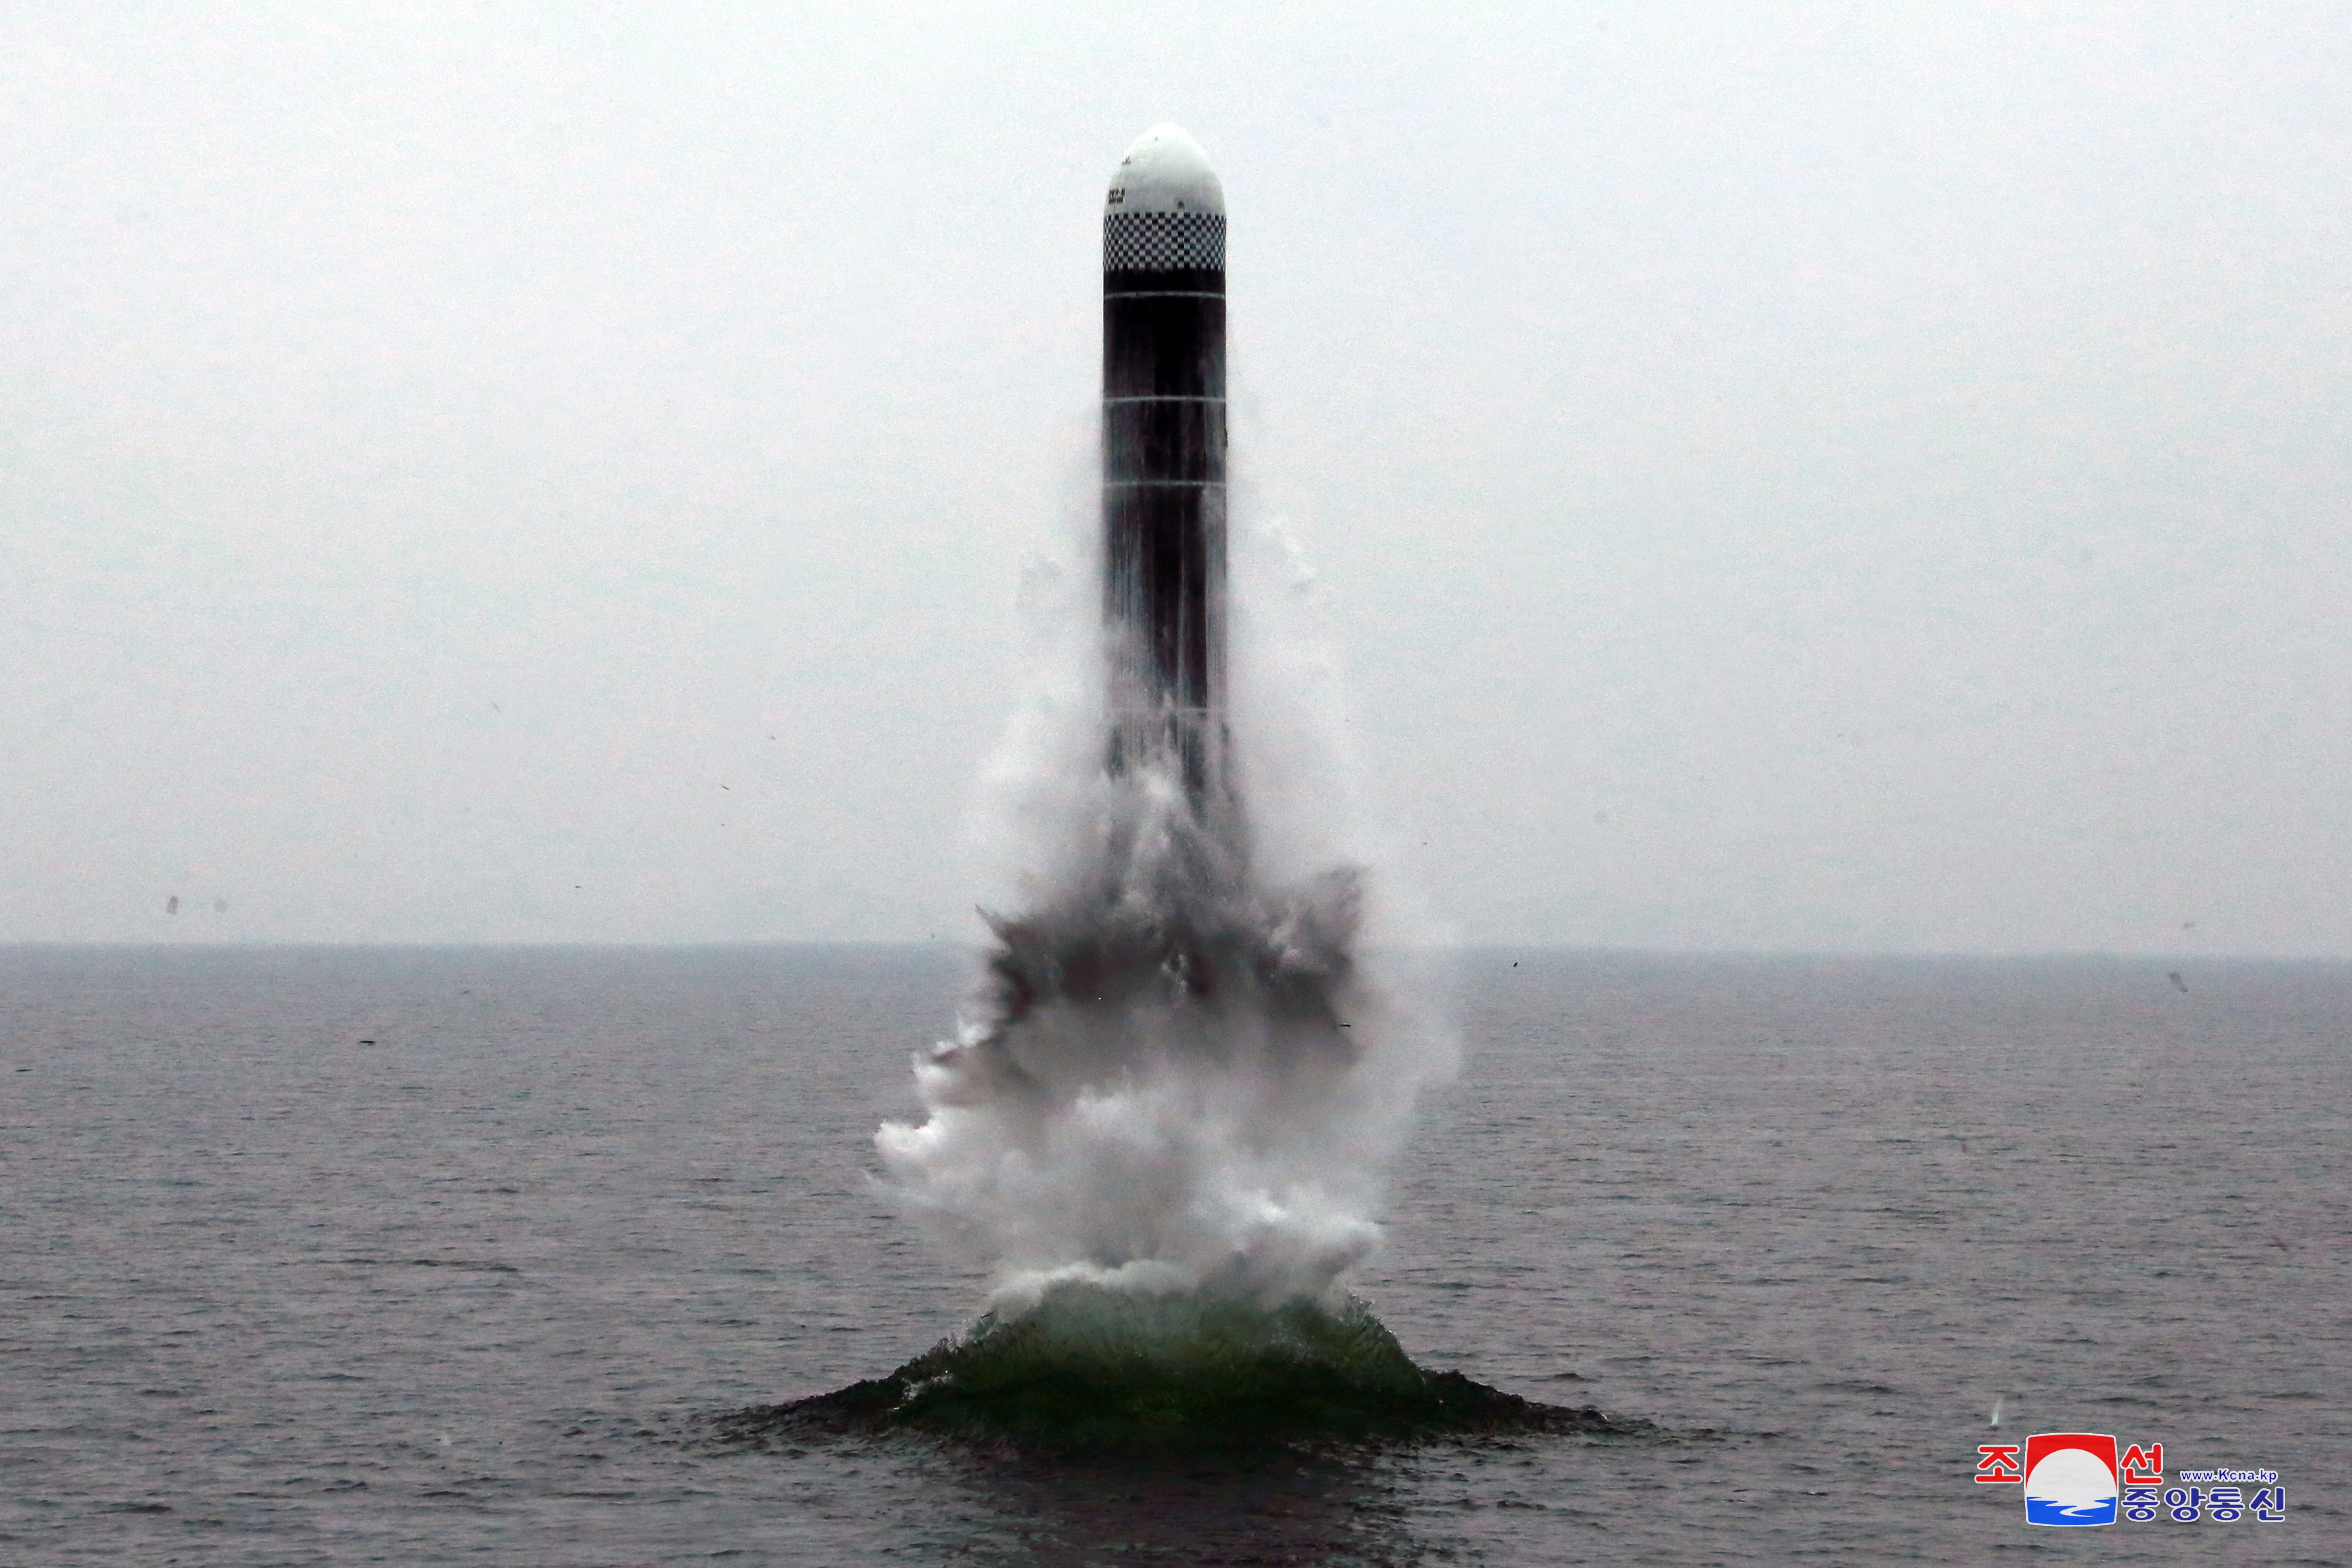 epa07890798 A photo released by the official North Korean Central News Agency (KCNA) shows the successful launch from a submarine of a Pukguksong-3, a new-type ballistic missile 
by the Academy of Defence Science of the Democratic People's Republic of Korea, in the waters off Wonsan Bay of the East Sea of Korea, 02 October 2019. According to South Korea's Joint Chiefs of Staff (JCS), North Korea again fired balistic missiles toward the East Sea ahead of the envisioned resumption of the stalled denuclearization talks with the United States.  EPA/KCNA   EDITORIAL USE ONLY